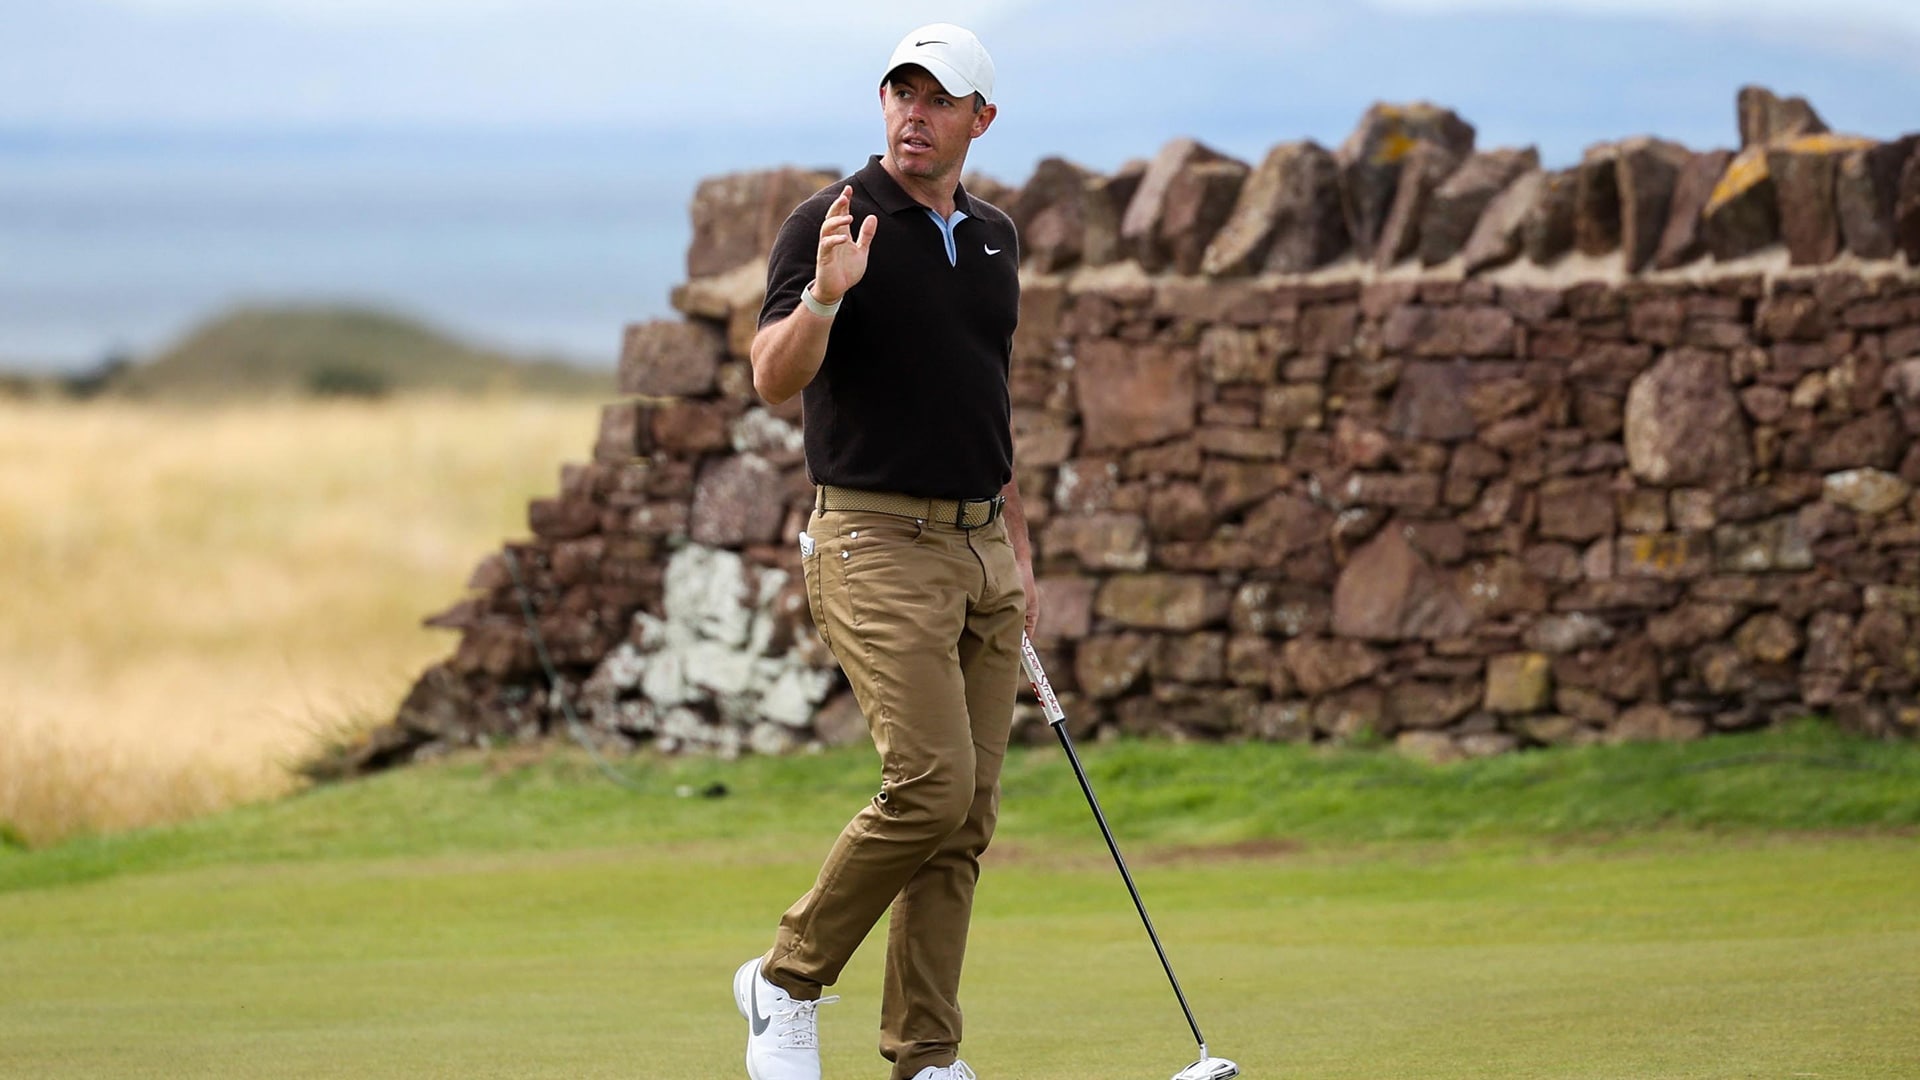 Rory McIlroy leads Tom Kim with heavy winds expected Sunday in Scotland